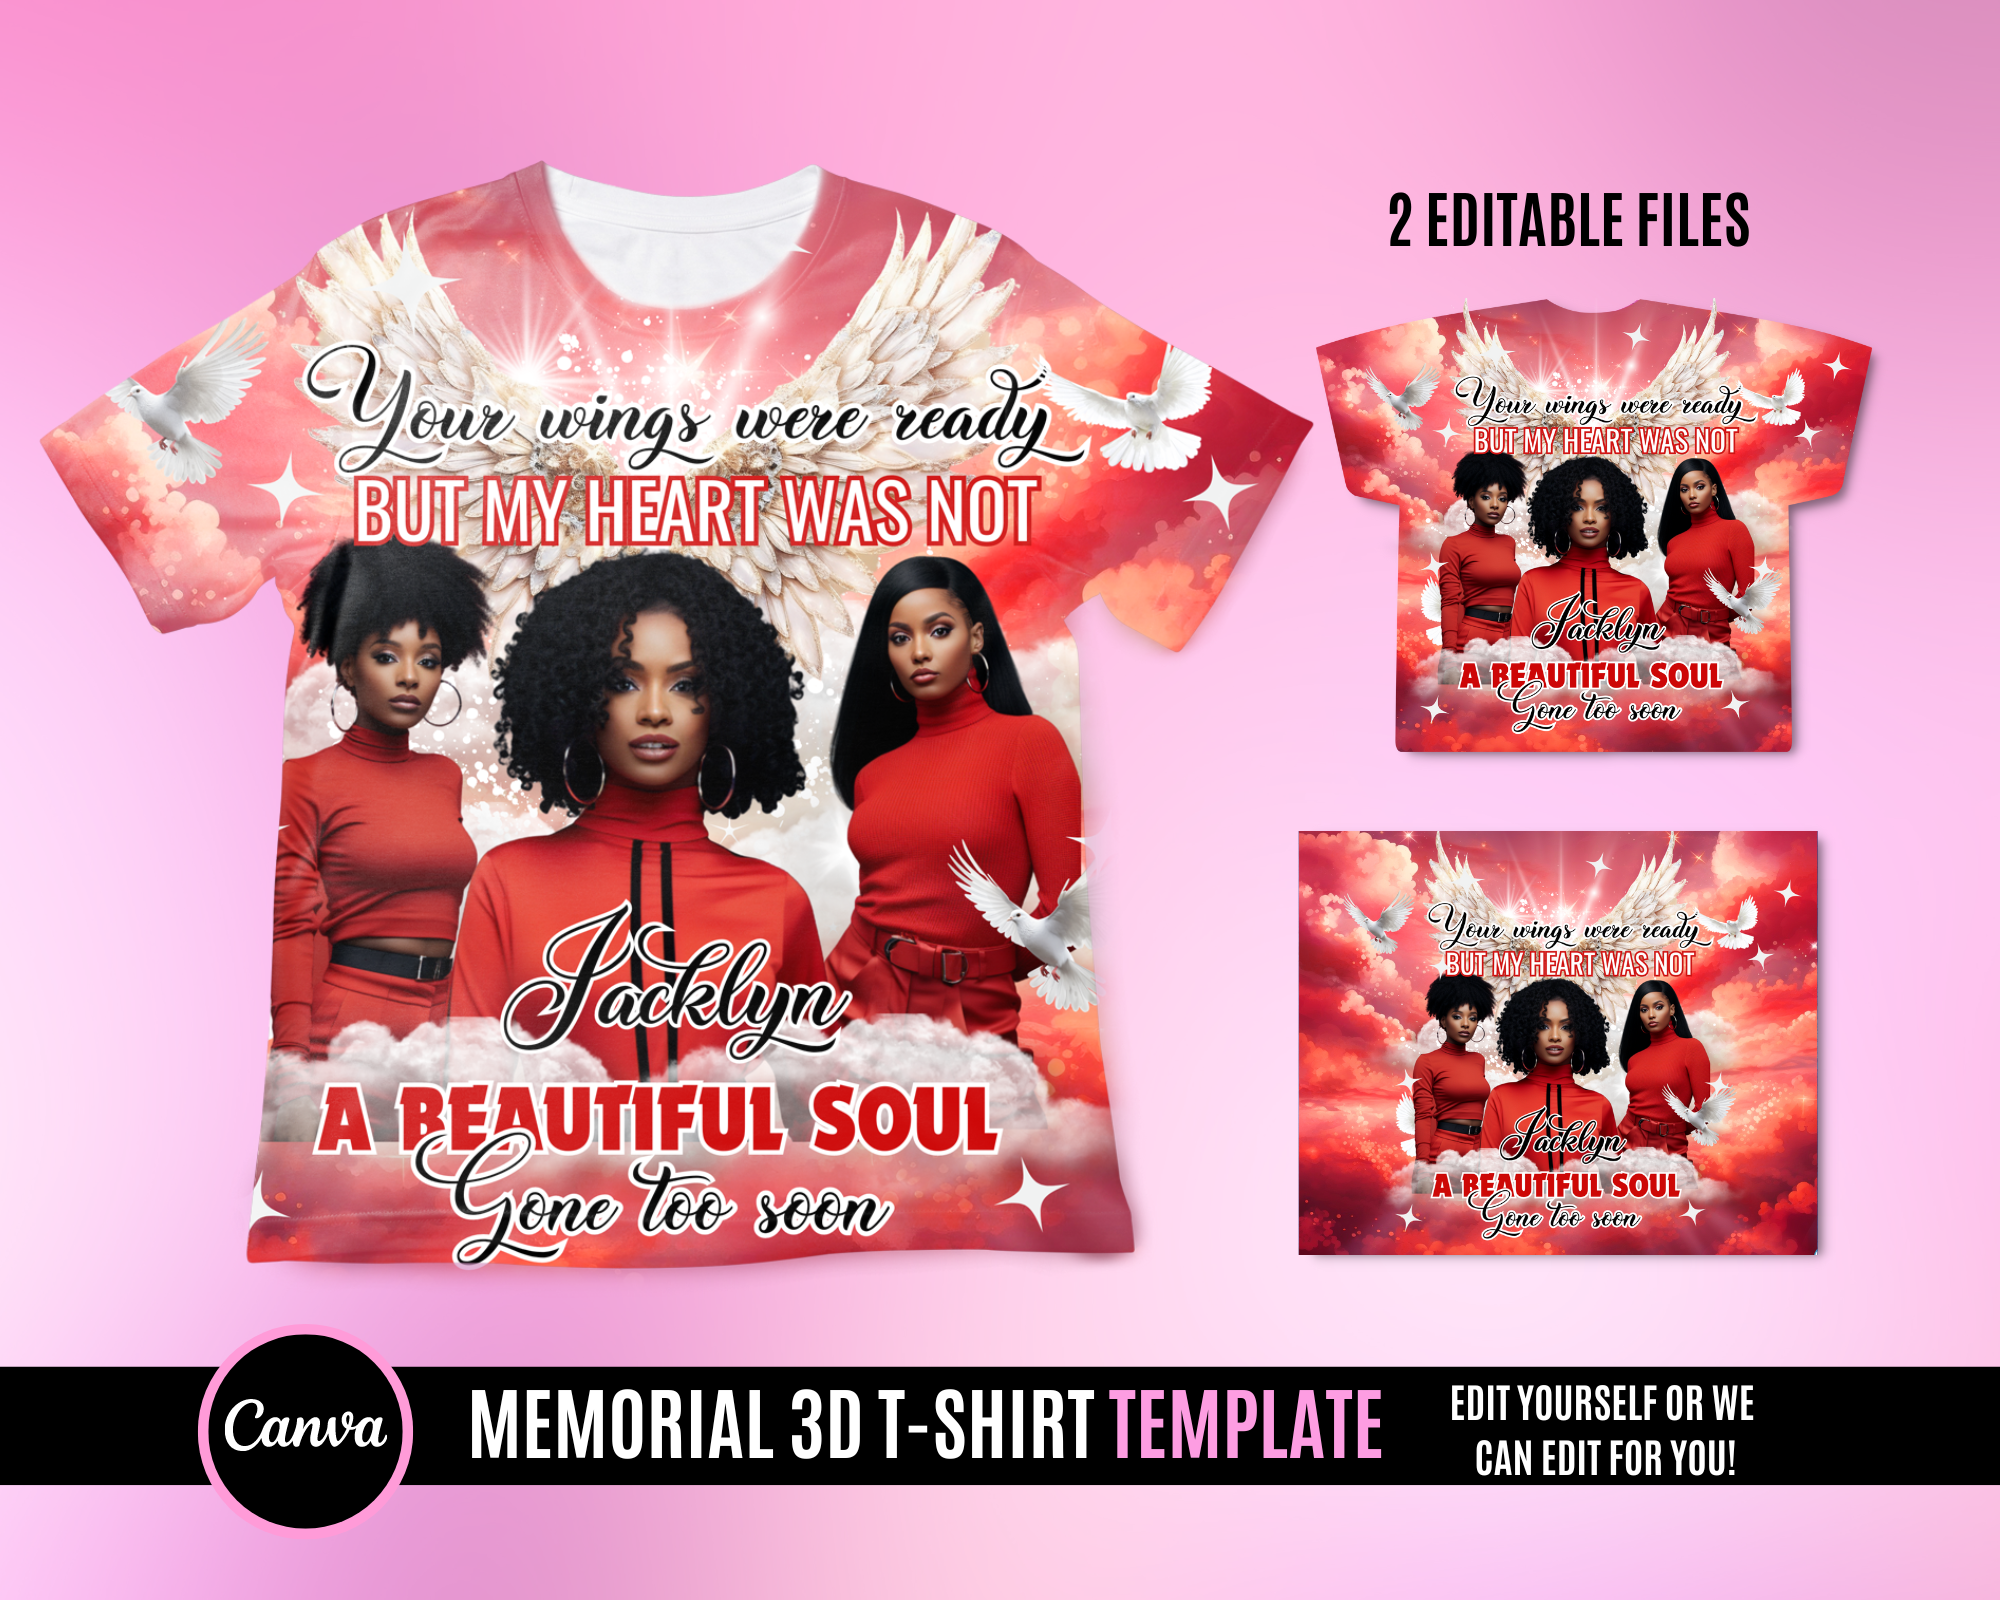 3D Tee Shirt Design File, Football Game Day Design File, Editable in canva,  T Shirt Design Template, Perfect for Sublimation, DTF or DTG